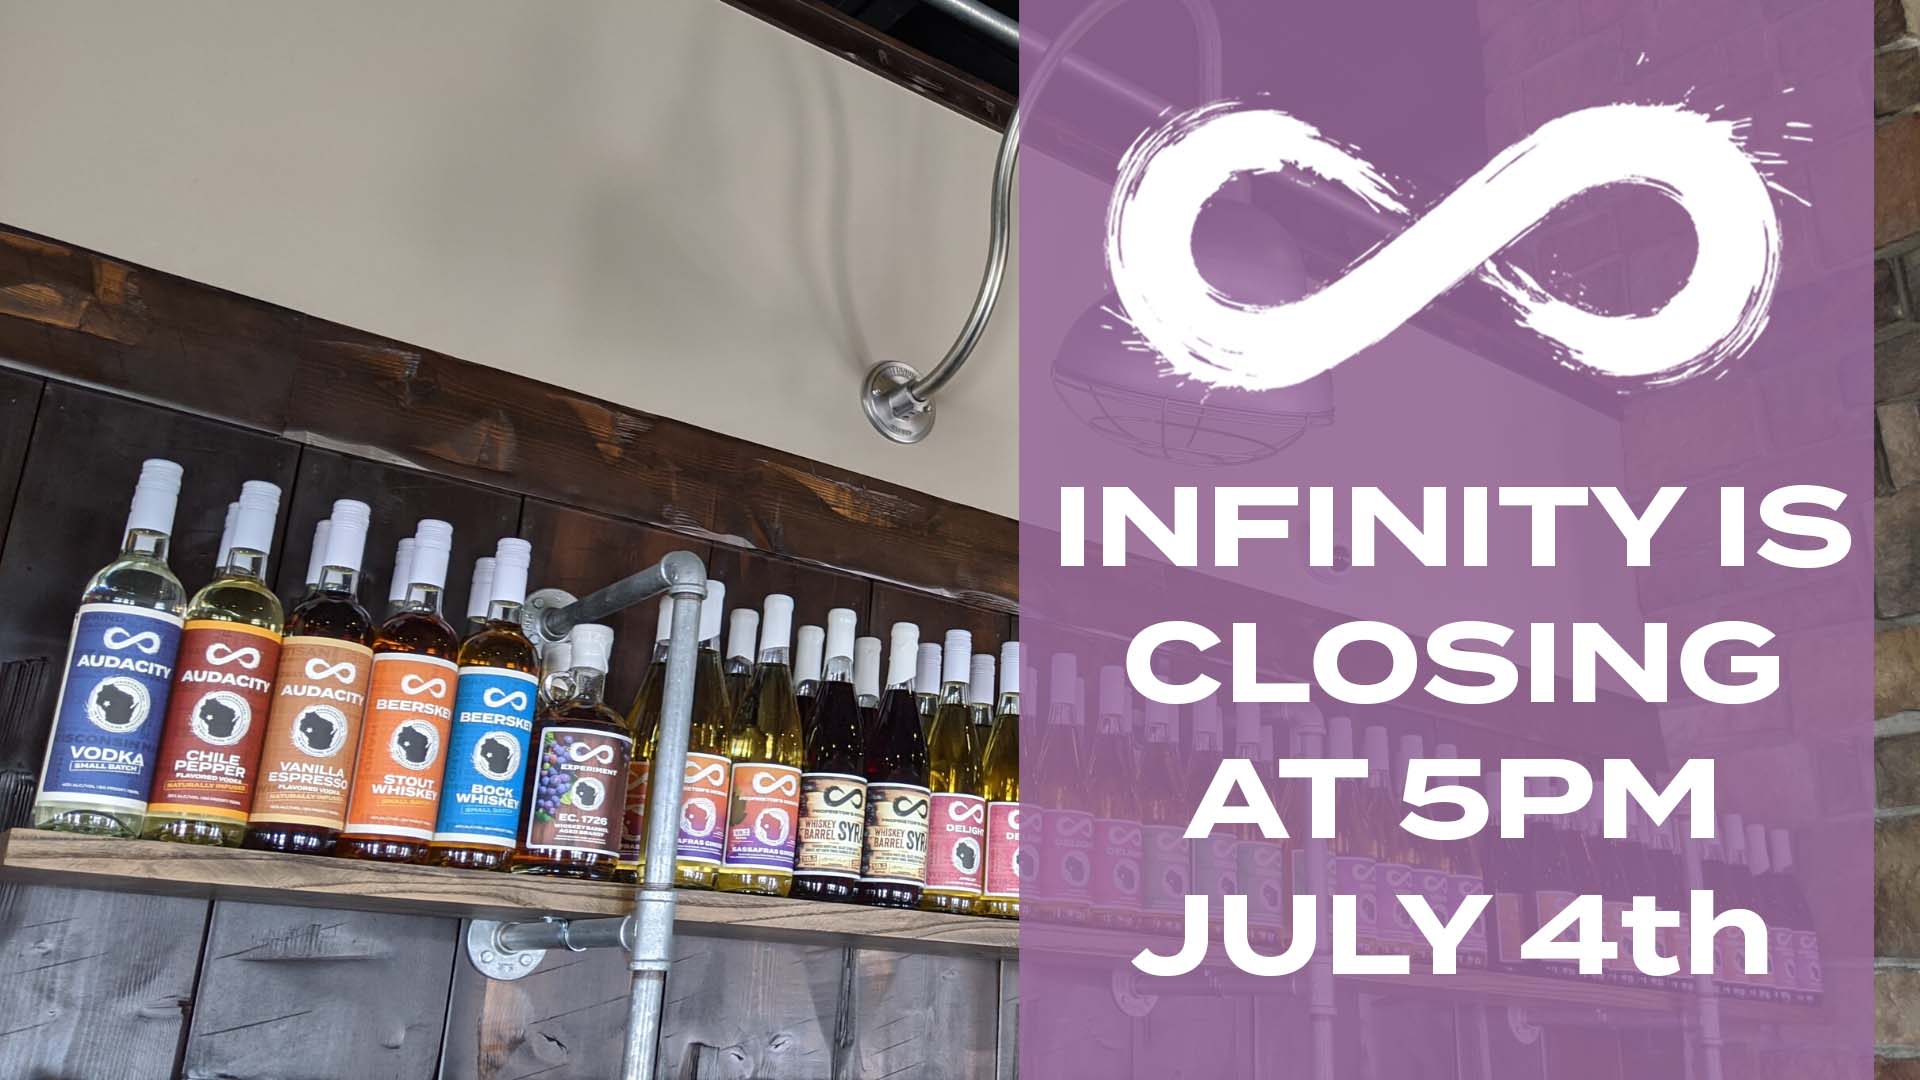 HOLIDAY HOURS: JULY 4TH